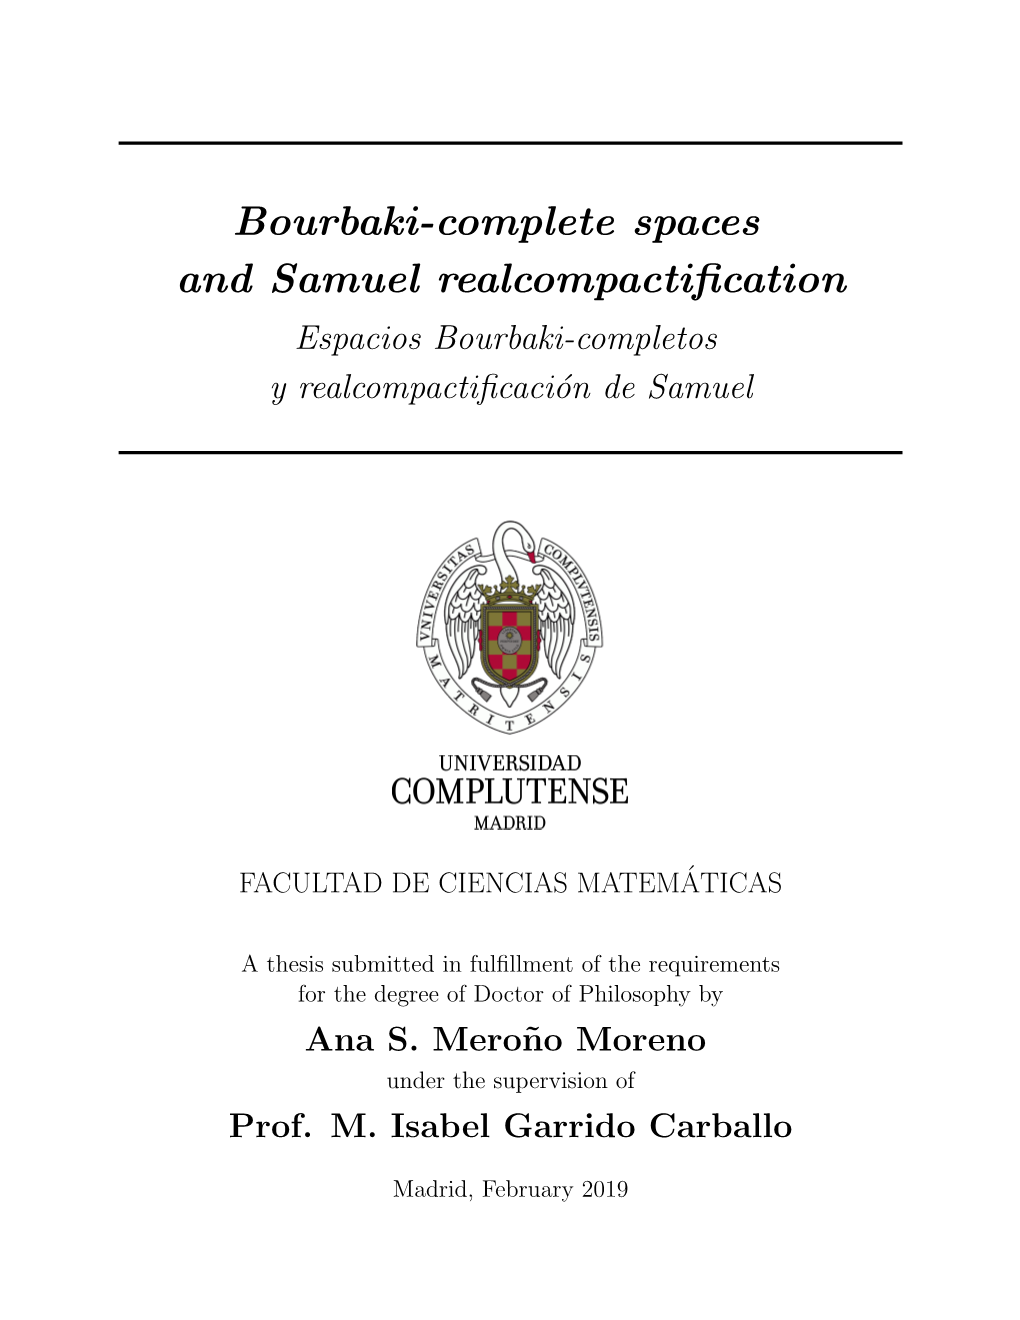 Bourbaki-Complete Spaces and Samuel Realcompactification